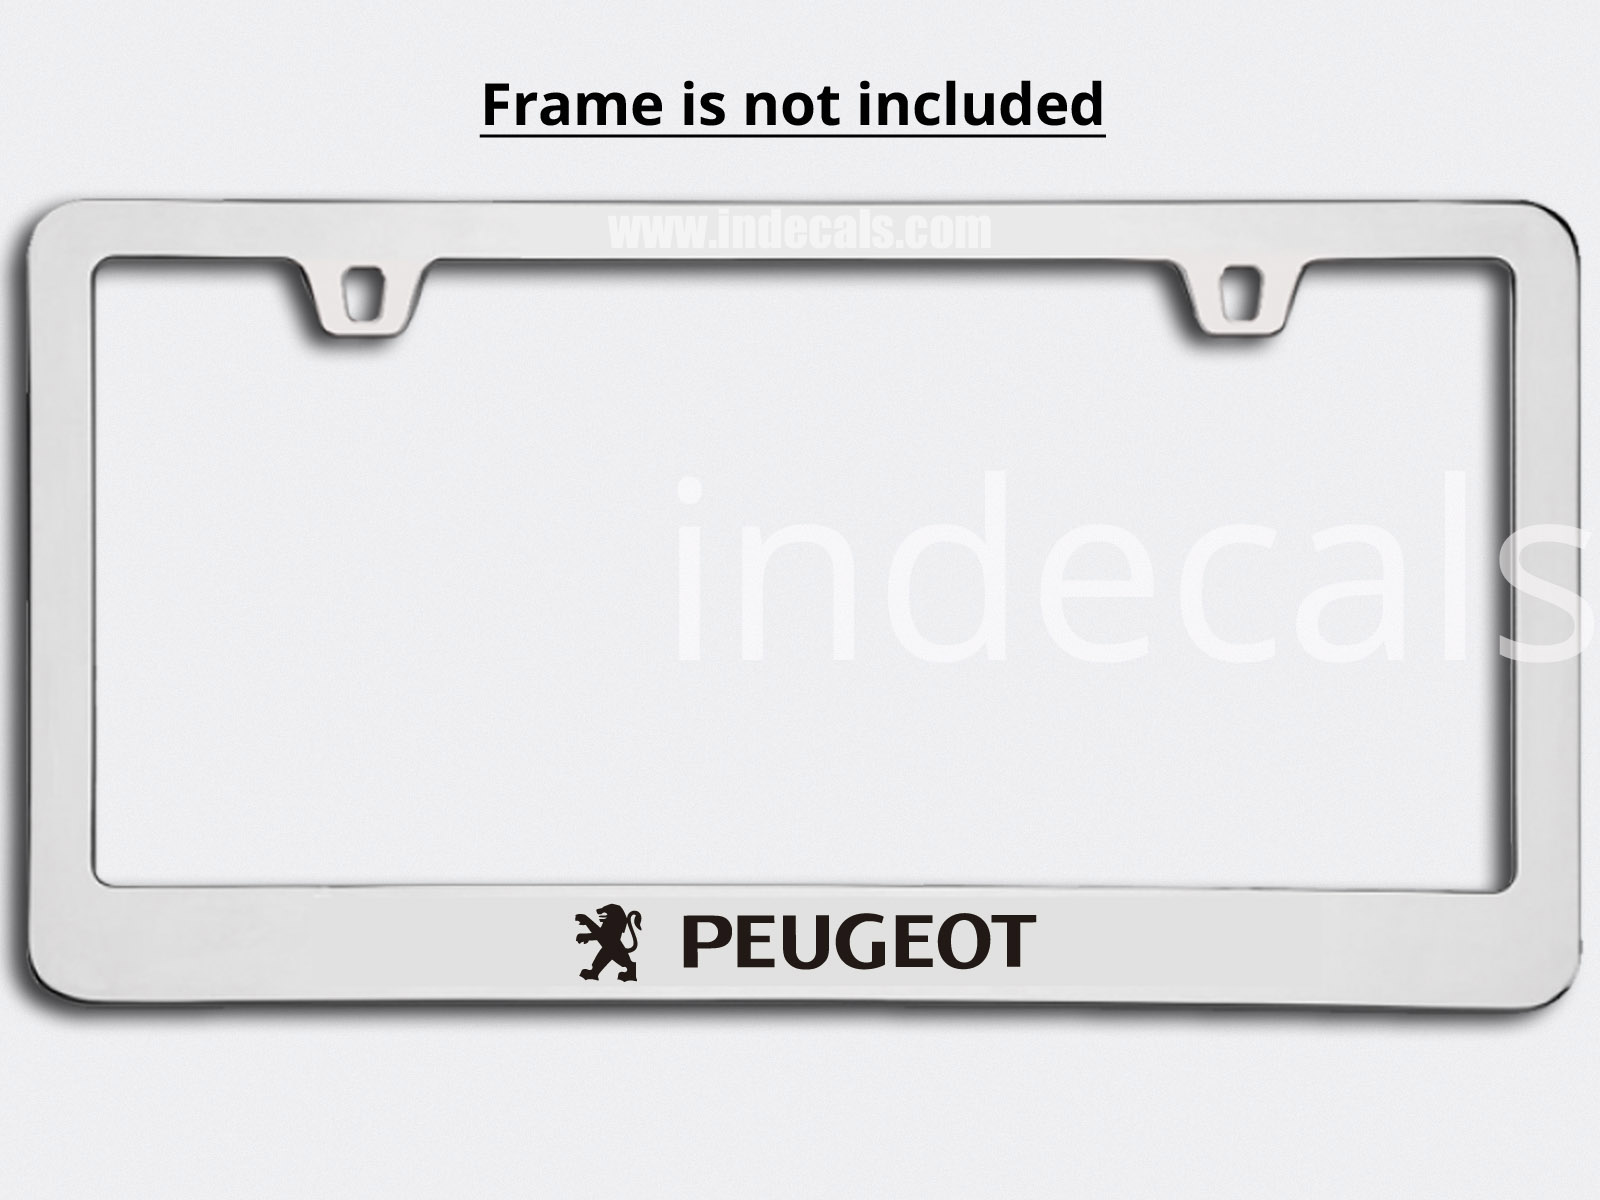 3 x Peugeot Stickers for Plate Frame - Black